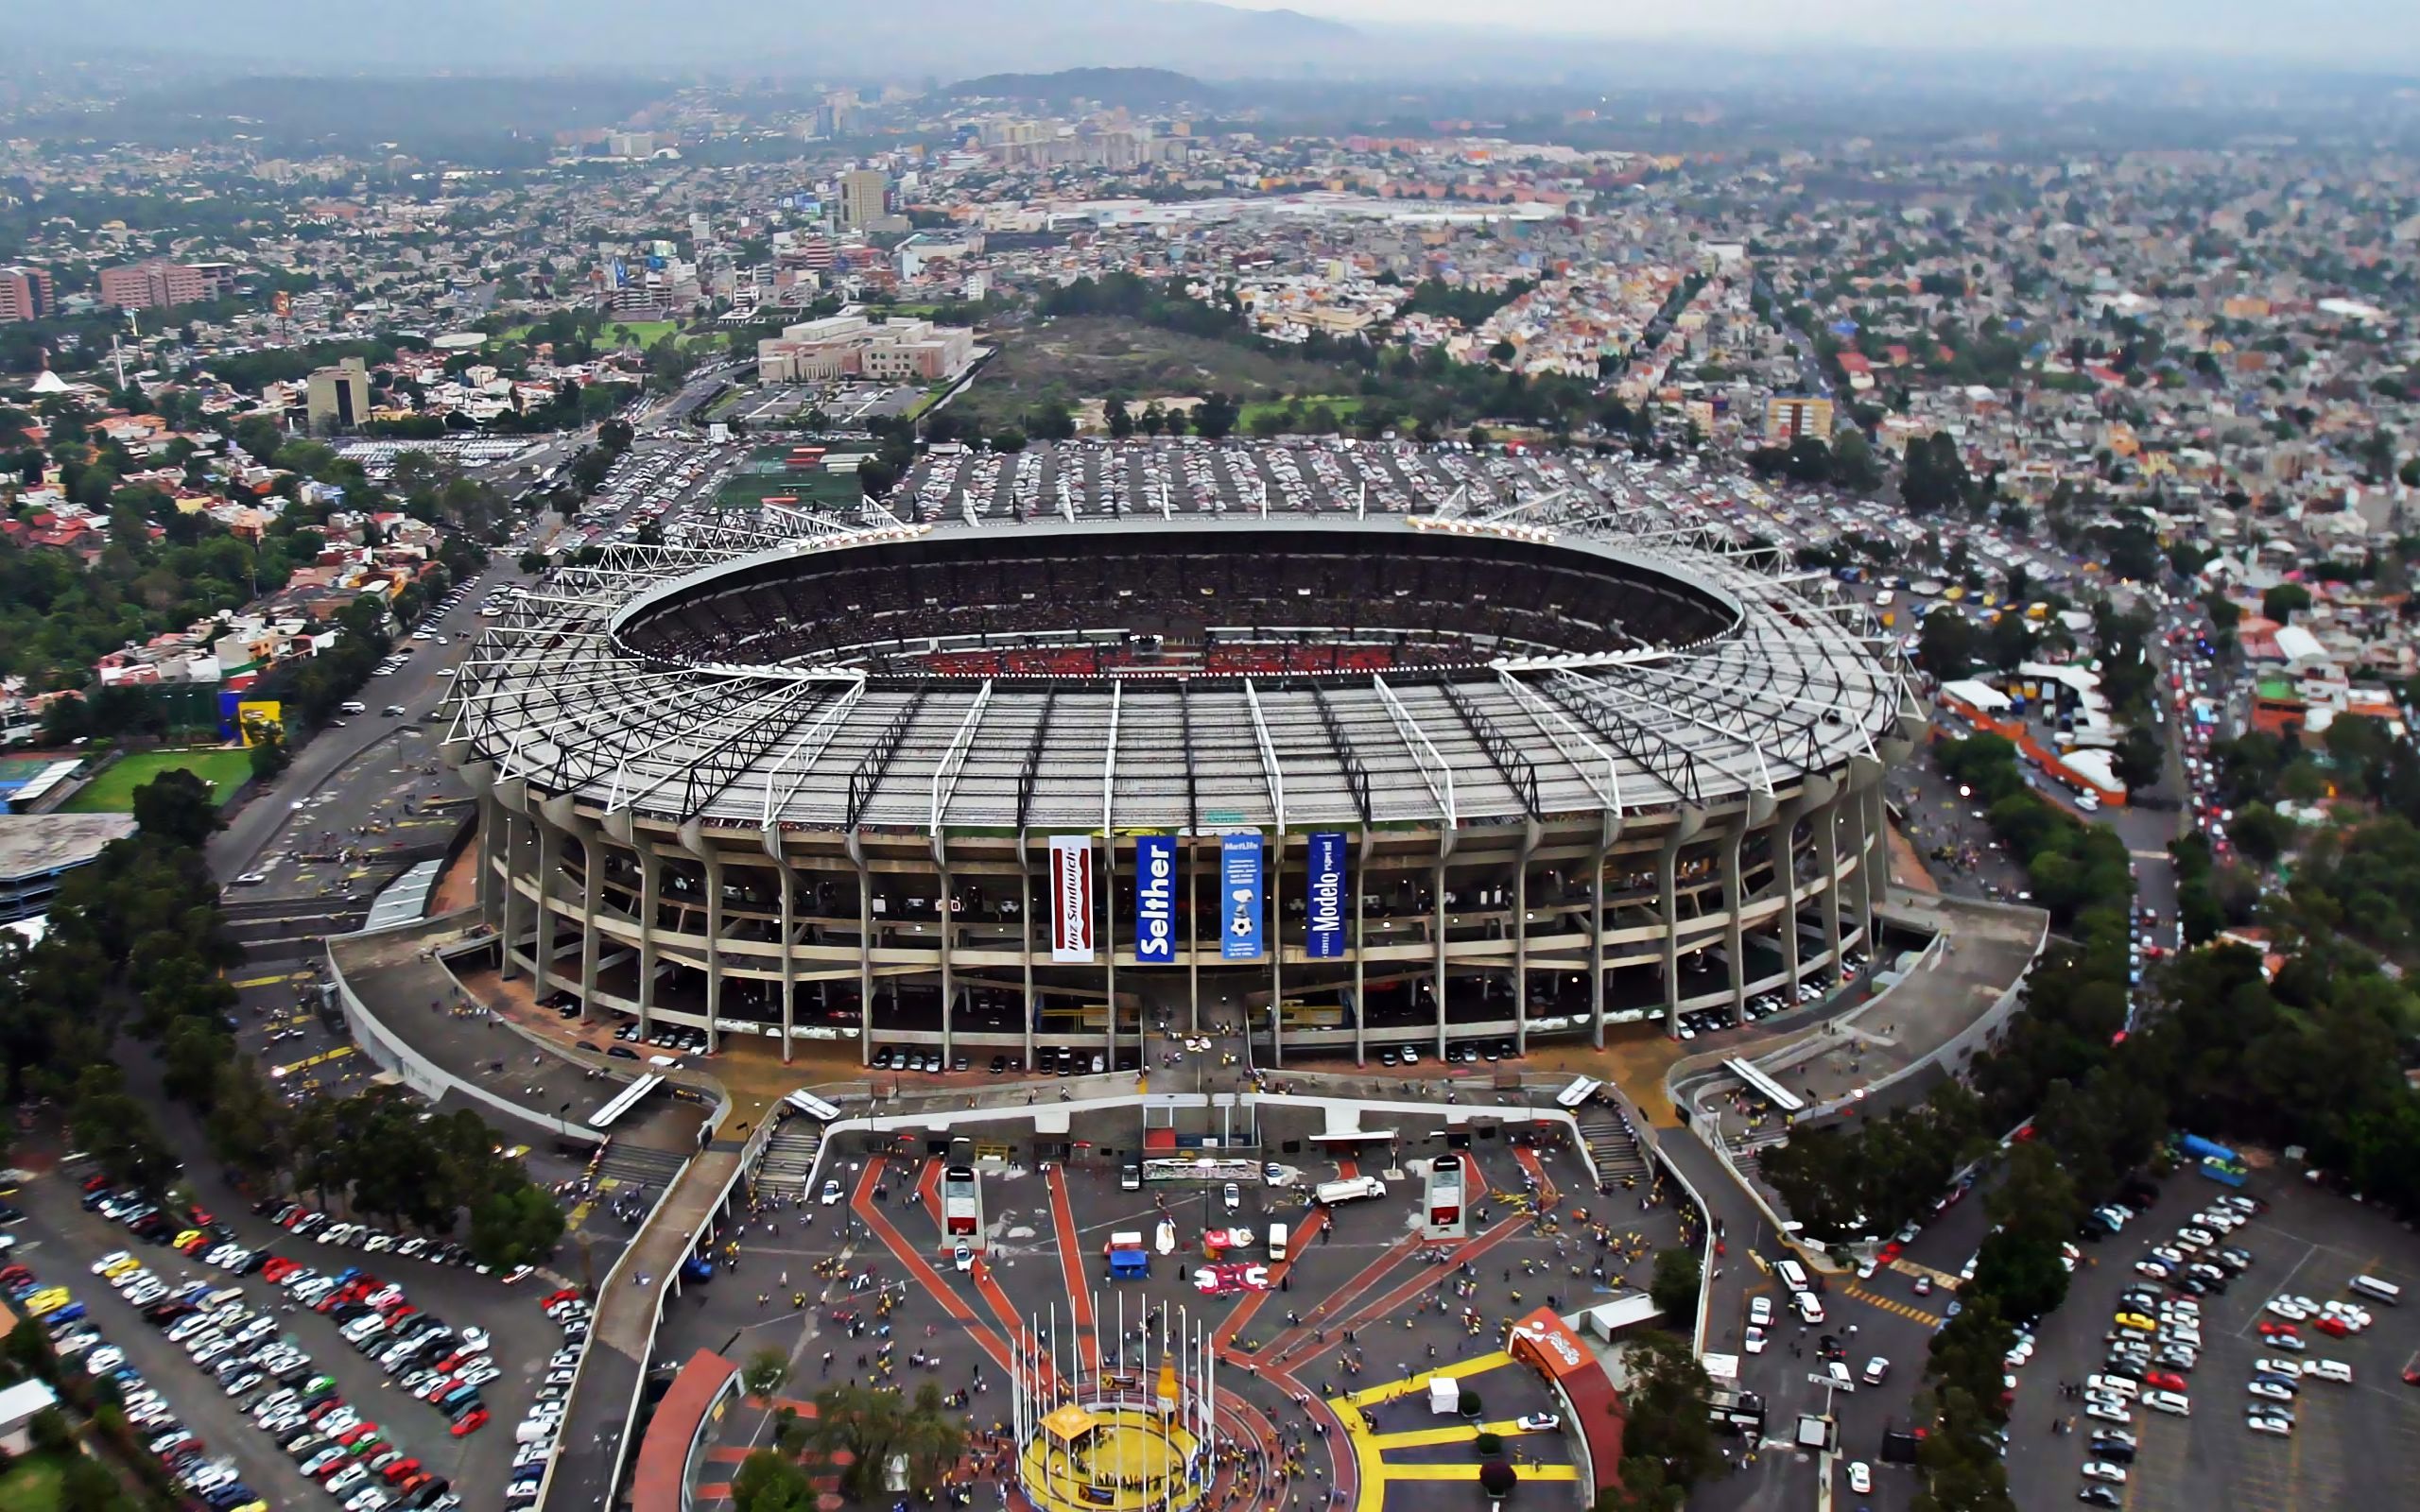 Download wallpaper Estadio Azteca, Mexico City, Tlalpan, Aztec Stadium, Club America Stadium, Mexican stadium, more than 100 thousand spectators, Mexico for desktop with resolution 2560x1600. High Quality HD picture wallpaper